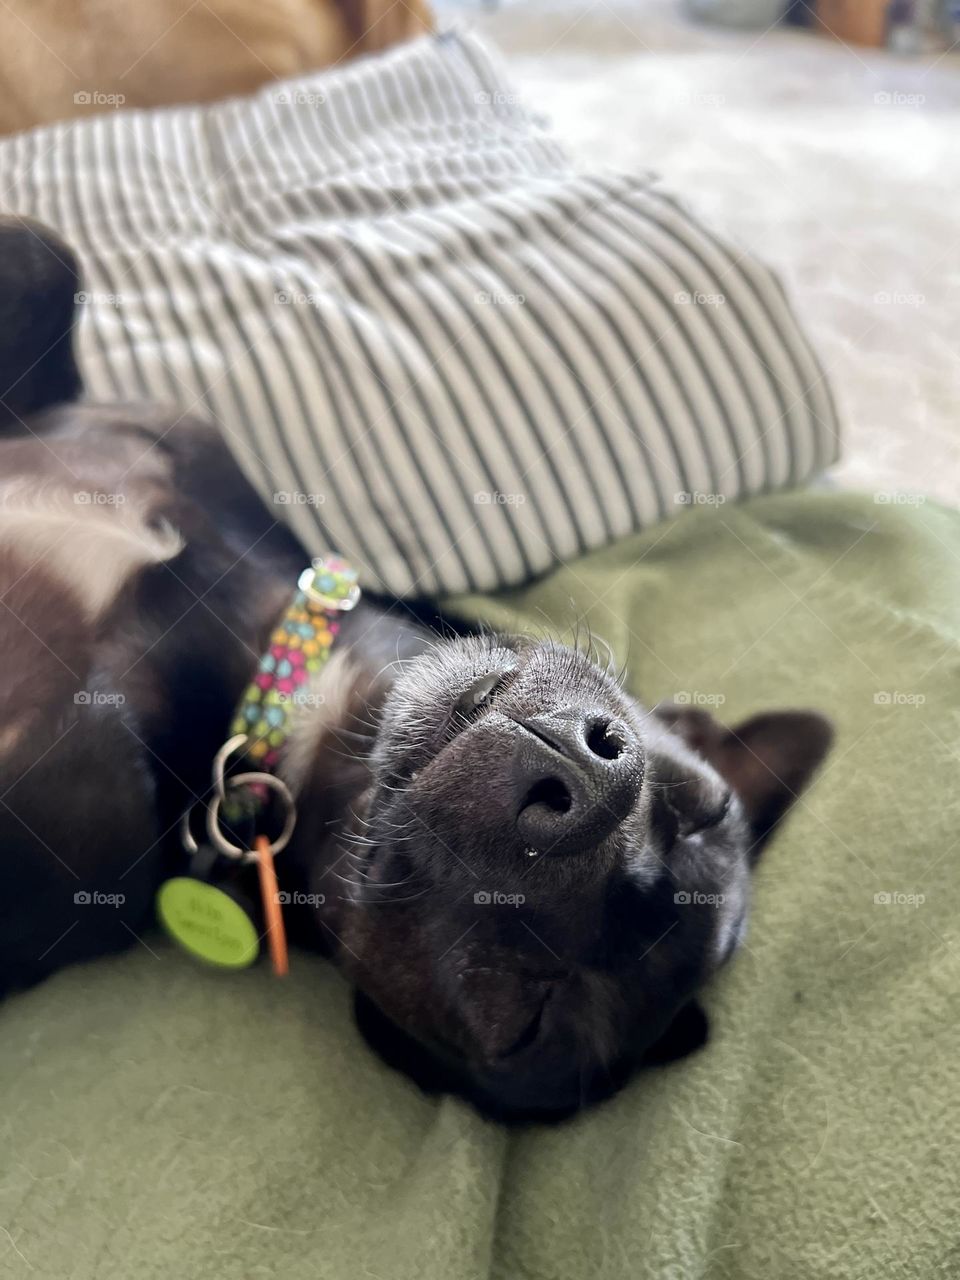 Tiny black Chihuahua dog closeup. She is sleeping soundly upside down, wearing a colorful collar with green ID tag.